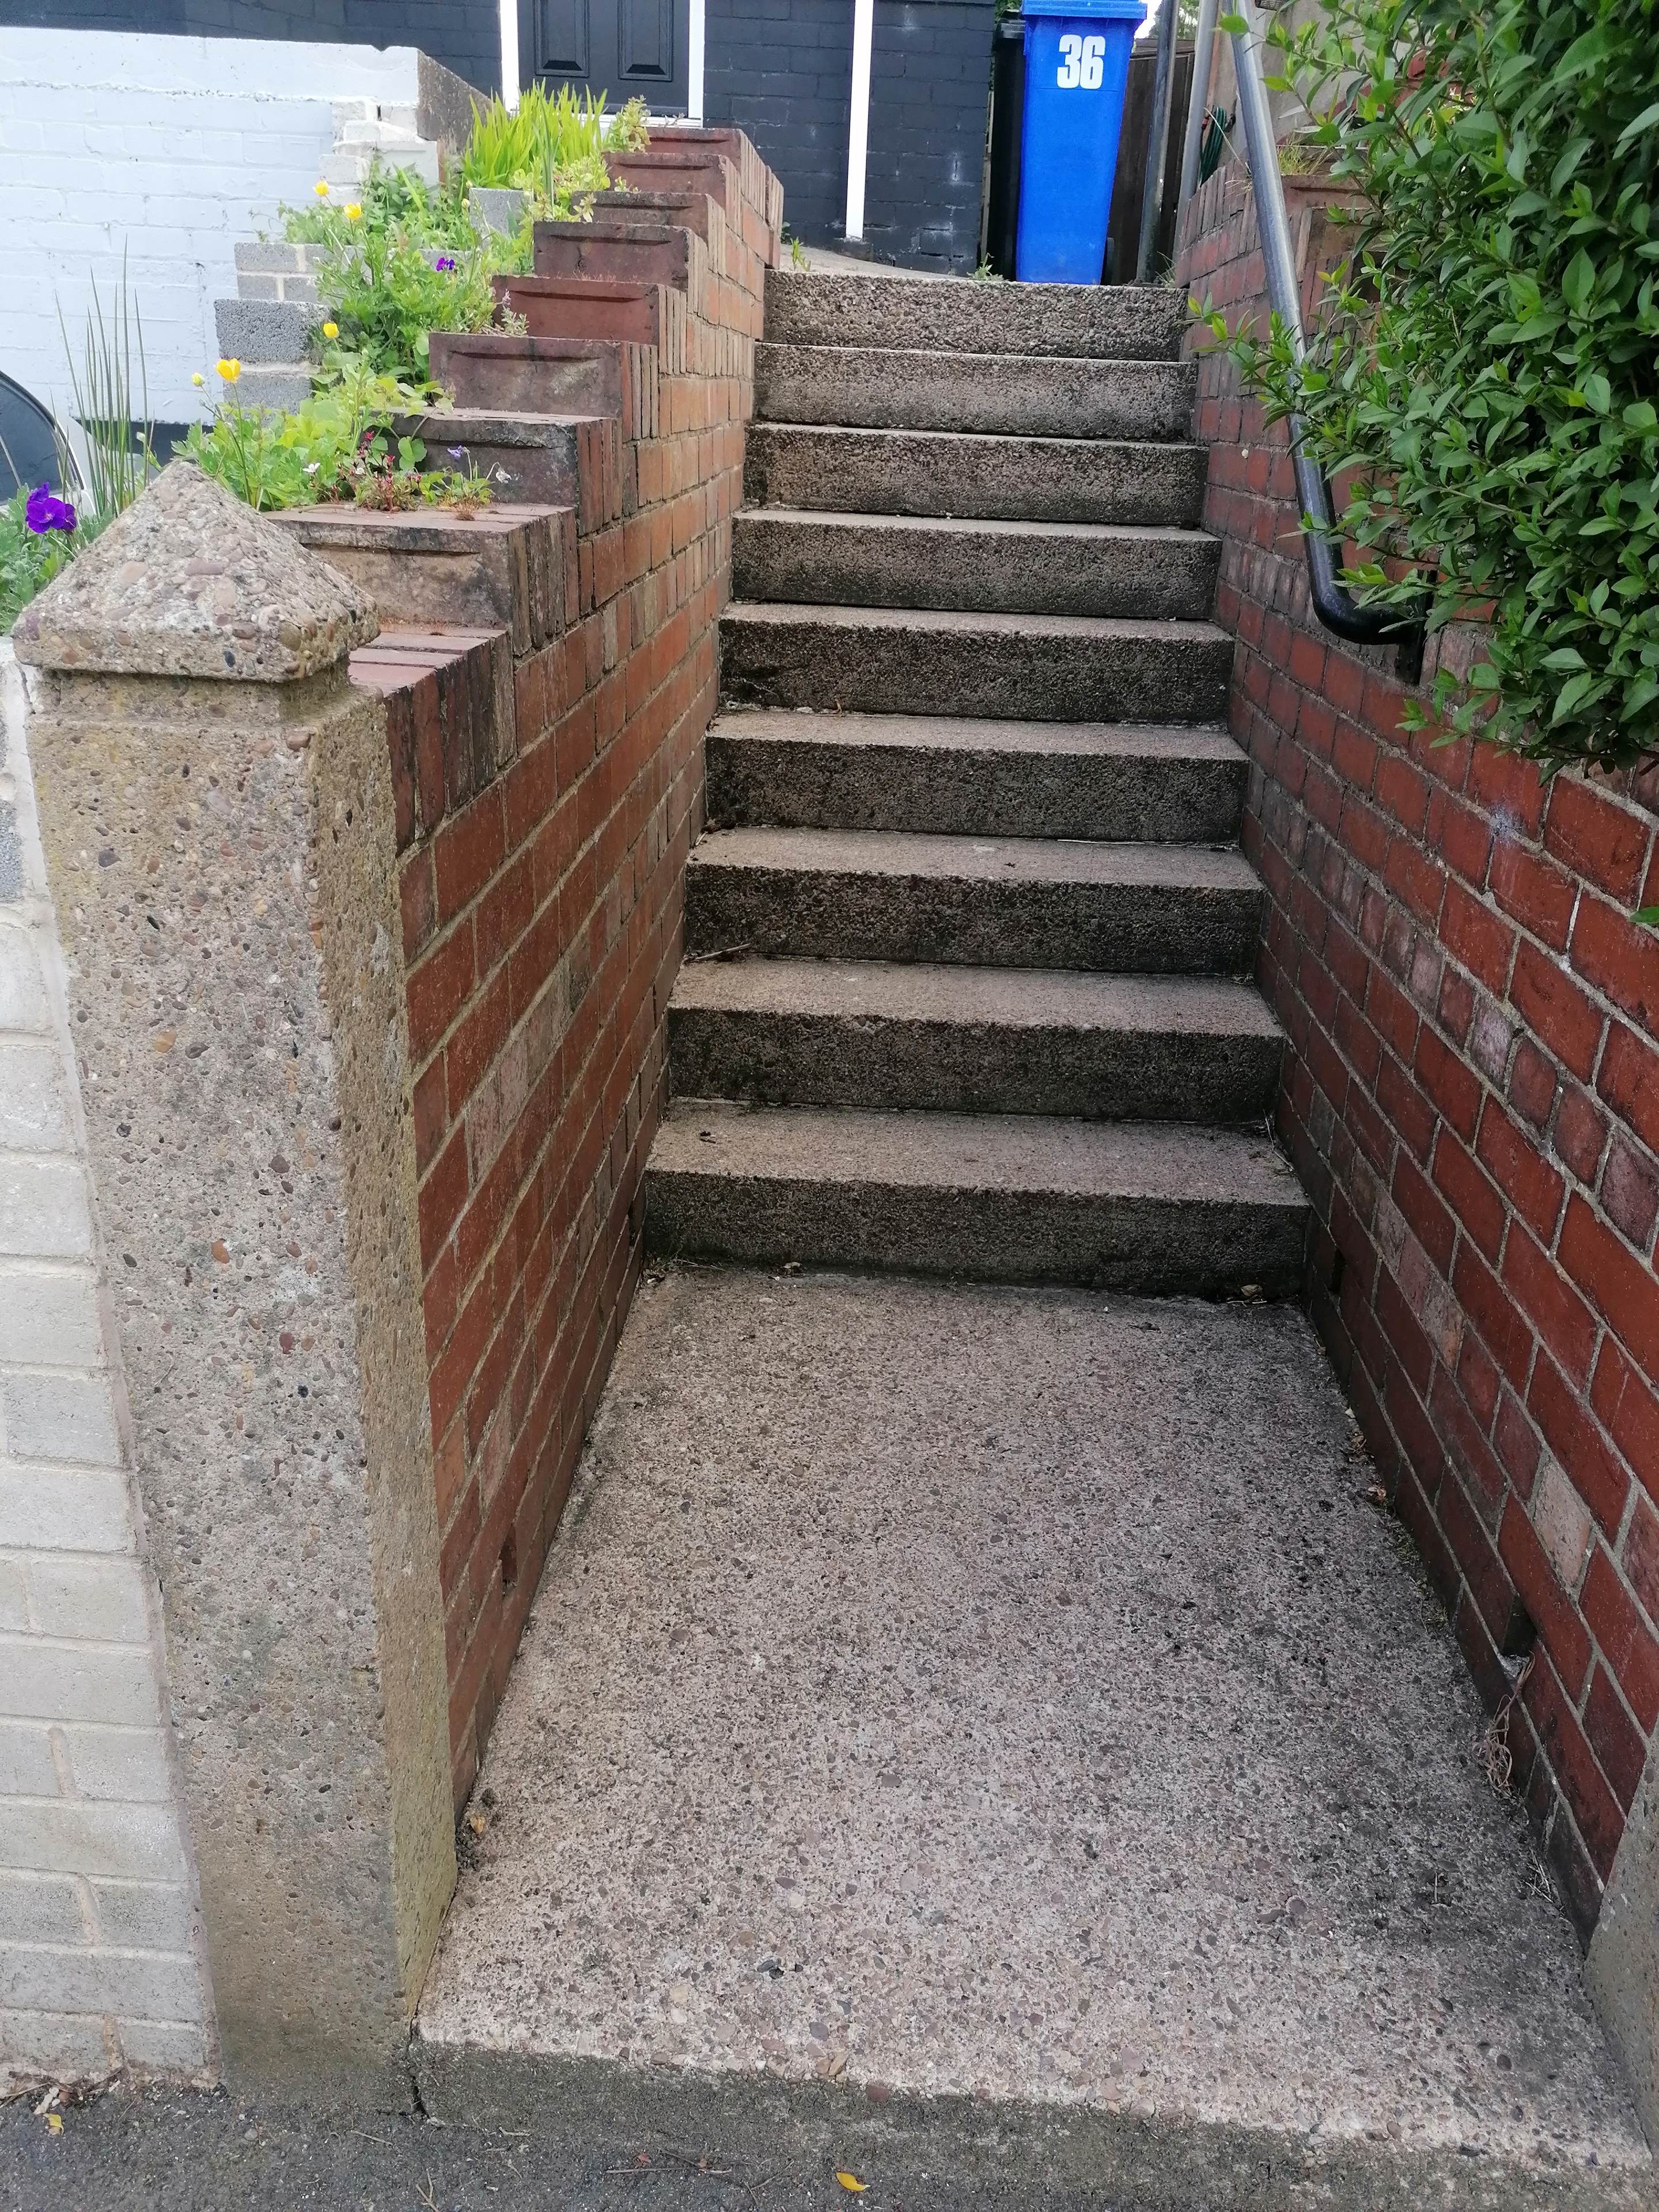 Outdoor steps, motorbike access.  - Page 1 - Homes, Gardens and DIY - PistonHeads